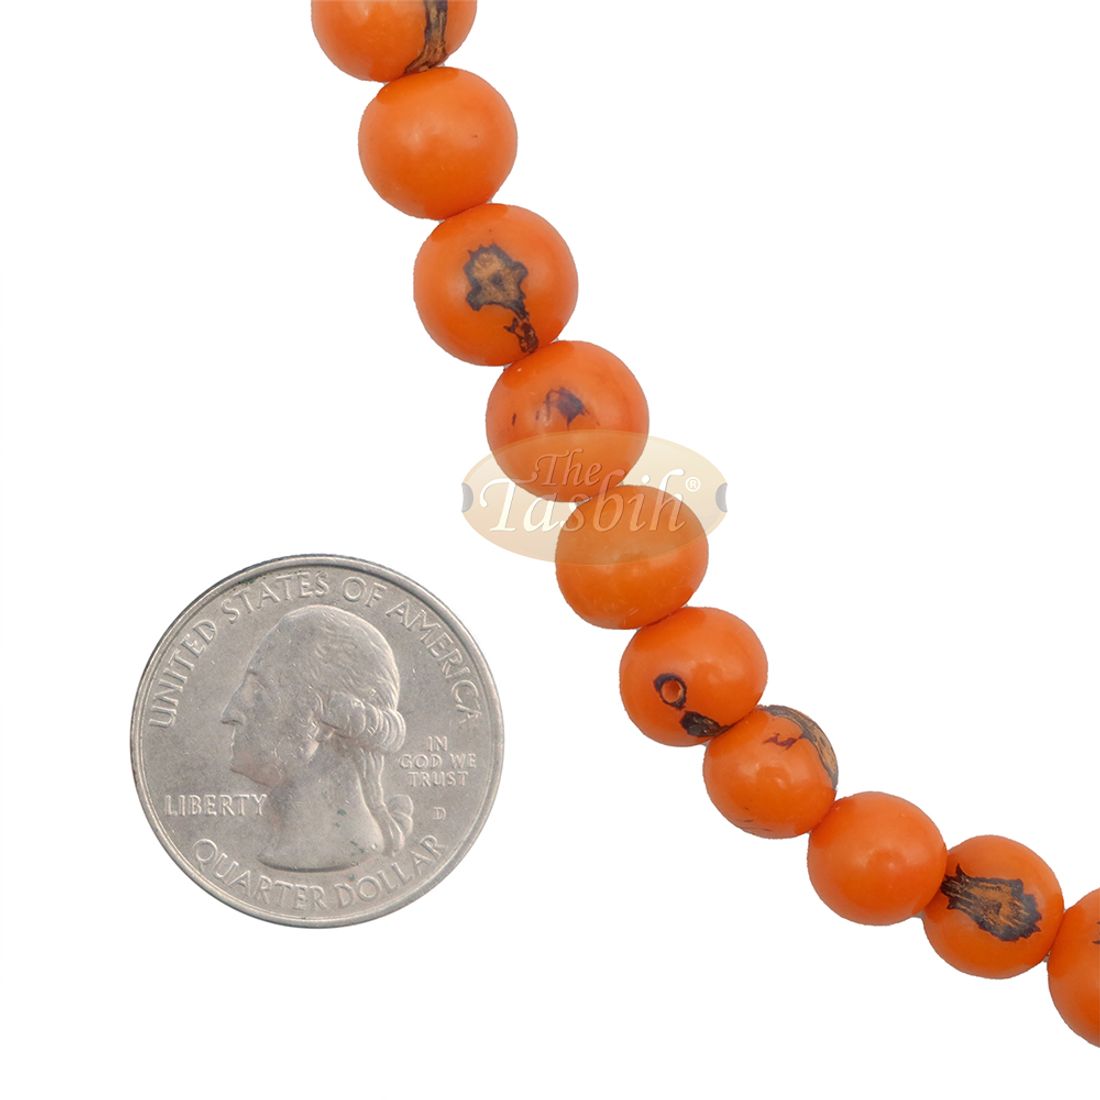 Orange Natural Colored Dye Eco-friendly Sustainable Original Açai Seed 9mm Beads Traditional Tasbih